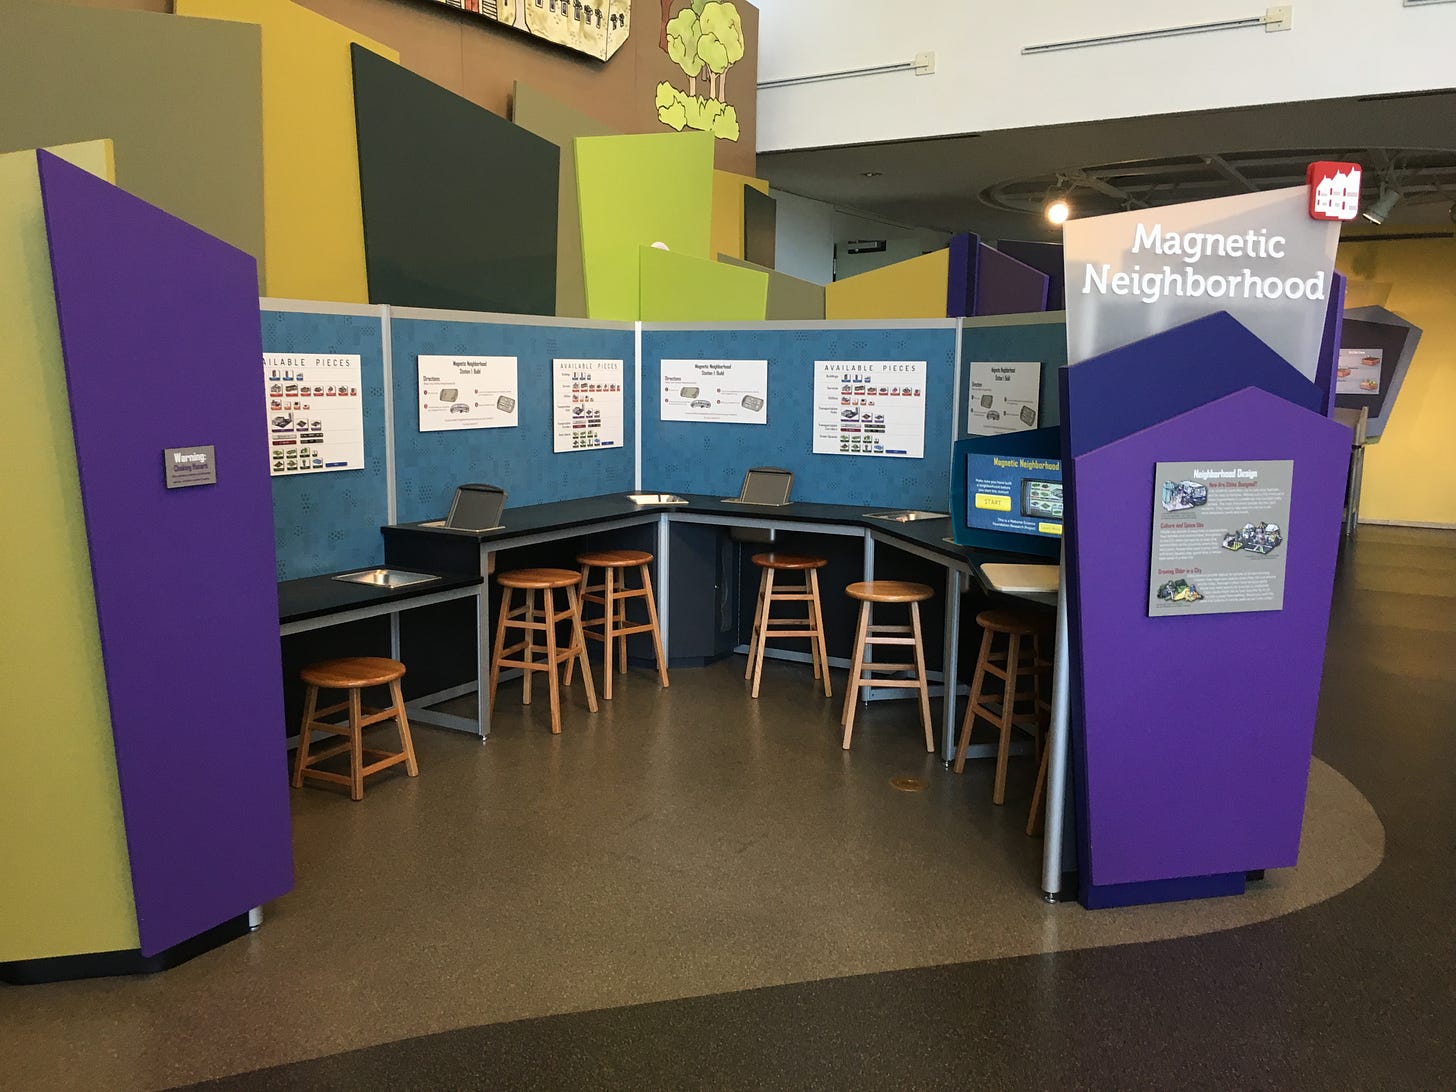 A U-shaped table enclosed by blue and purple walls, with six stools at the table. On the table are bins holding metal baking sheets. On the walls are posters that describe what magnets people can use on the trays.